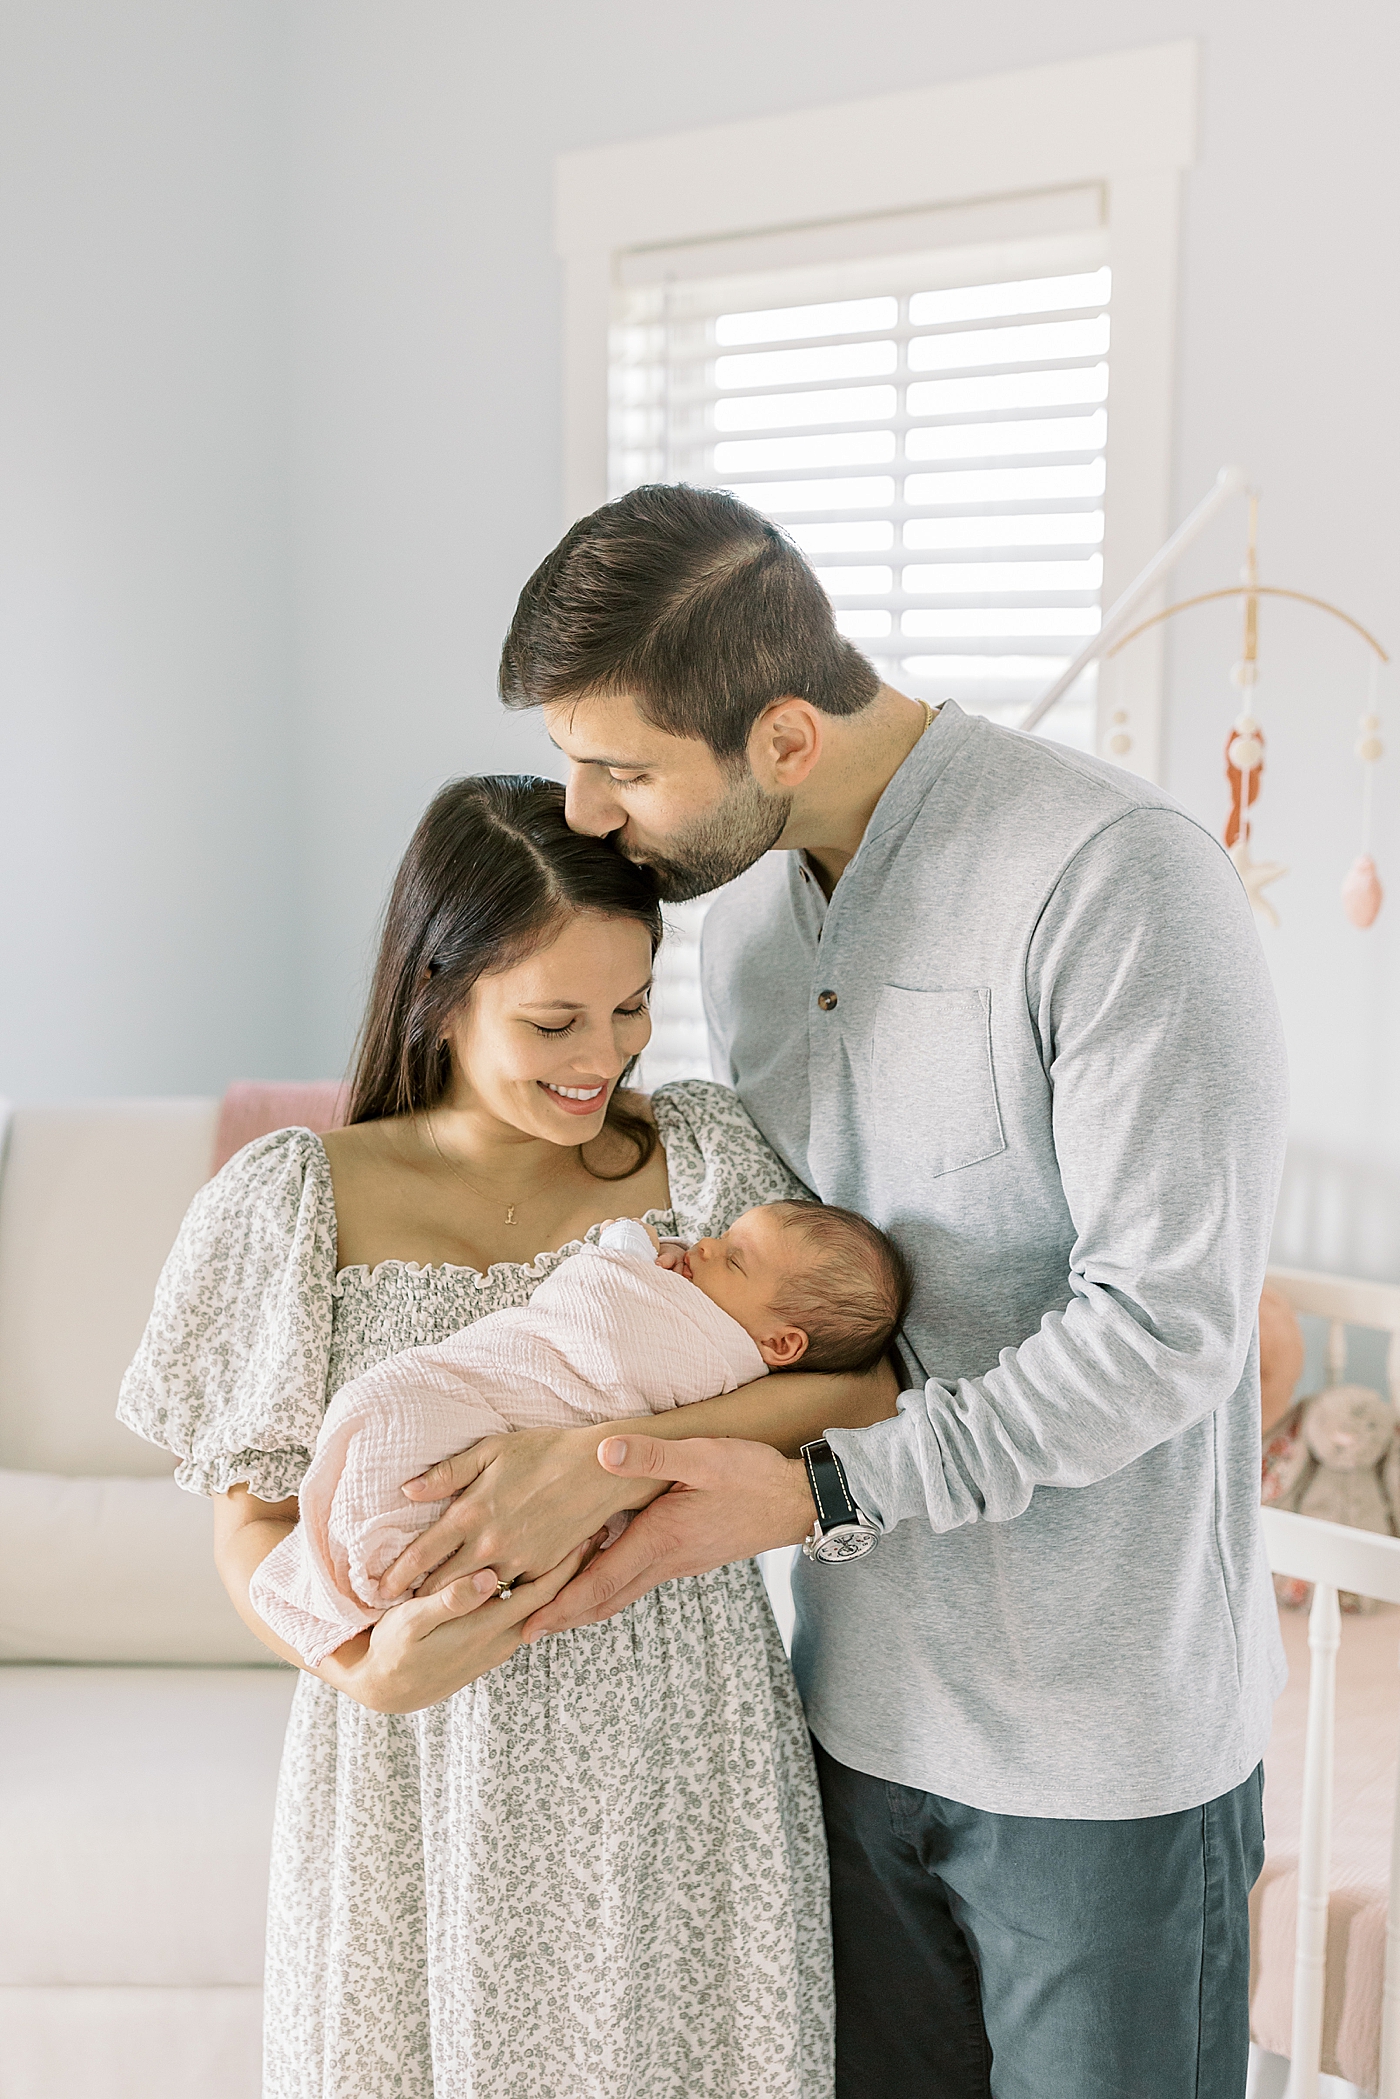 Mom and dad snuggling their baby in their nursery | Image by Caitlyn Motycka